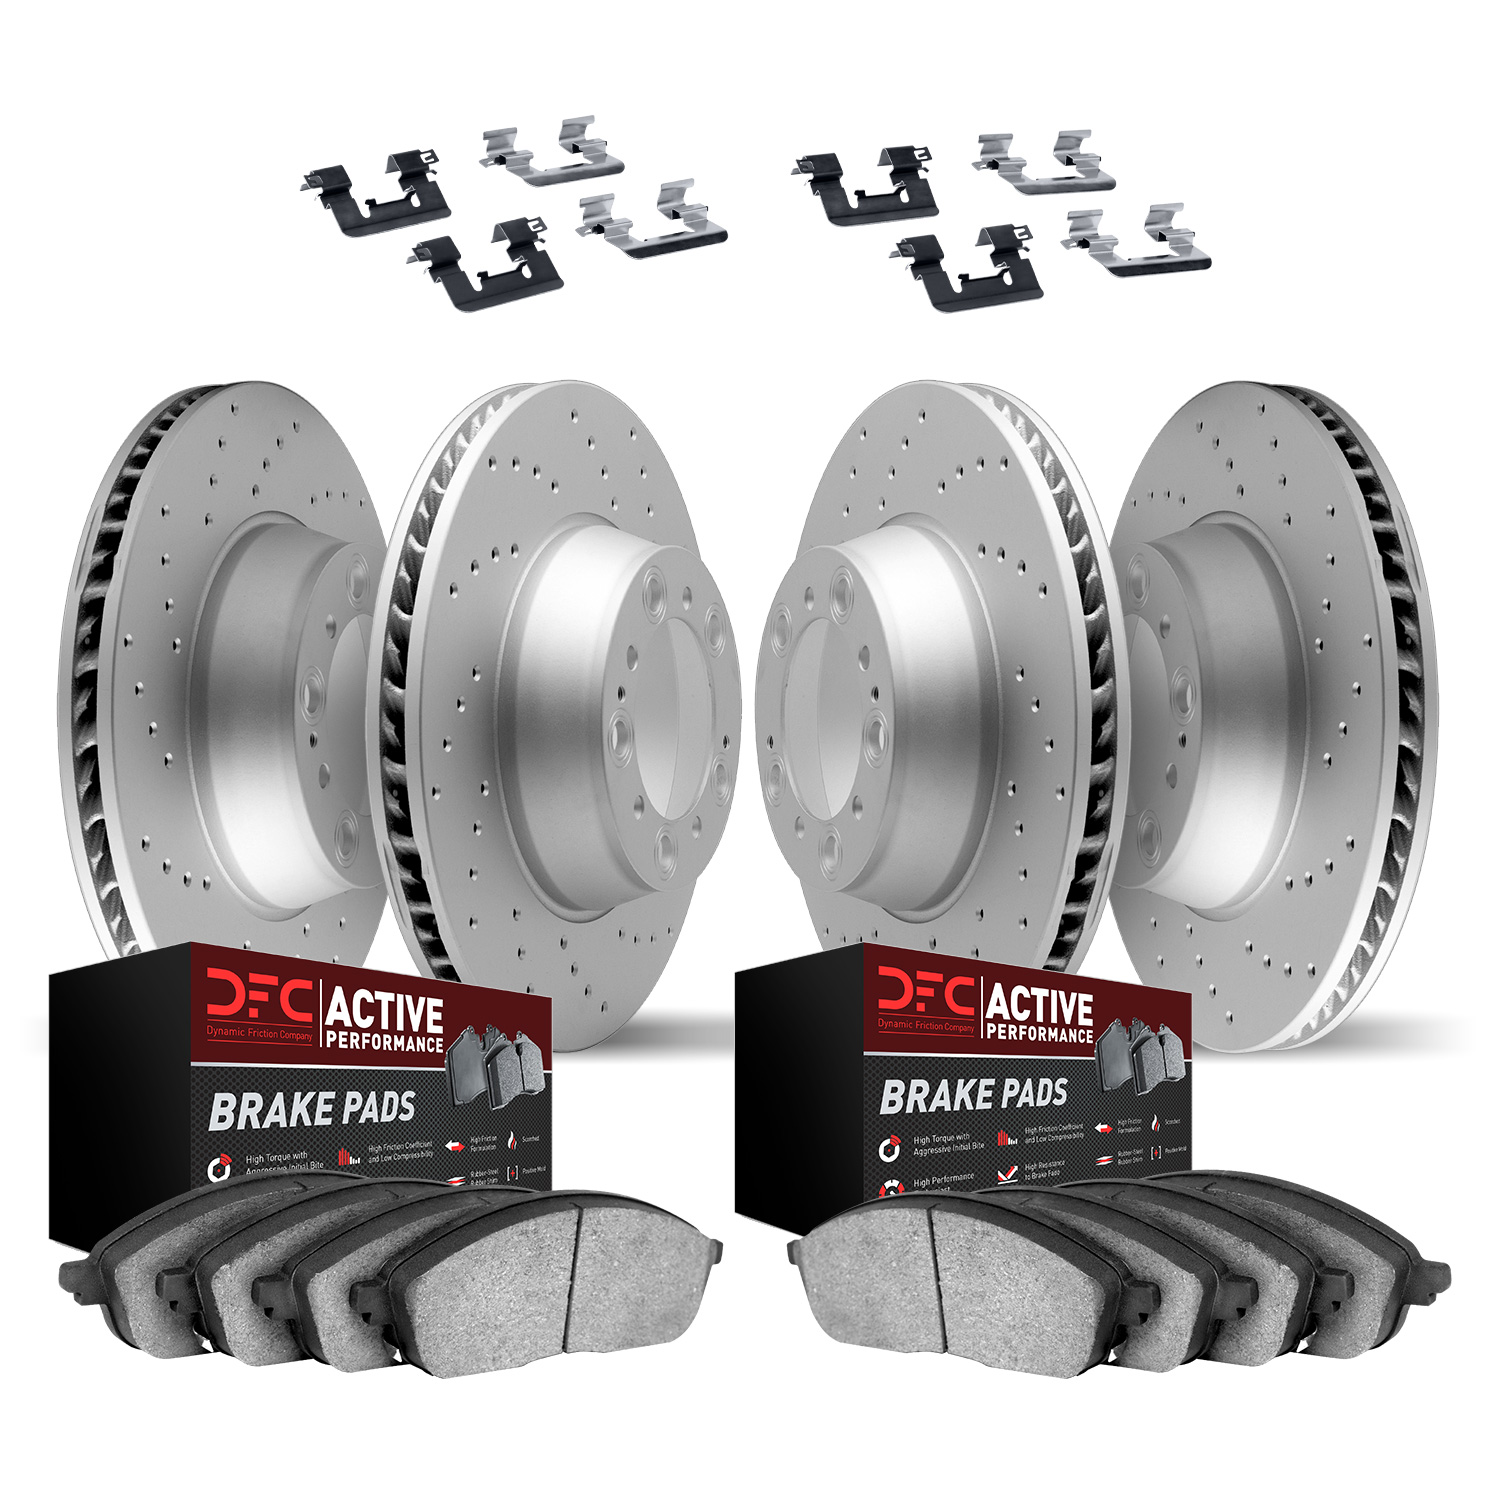 2714-31050 Geoperformance Drilled Brake Rotors with Active Performance Pads Kit & Hardware, 2006-2008 BMW, Position: Front and R